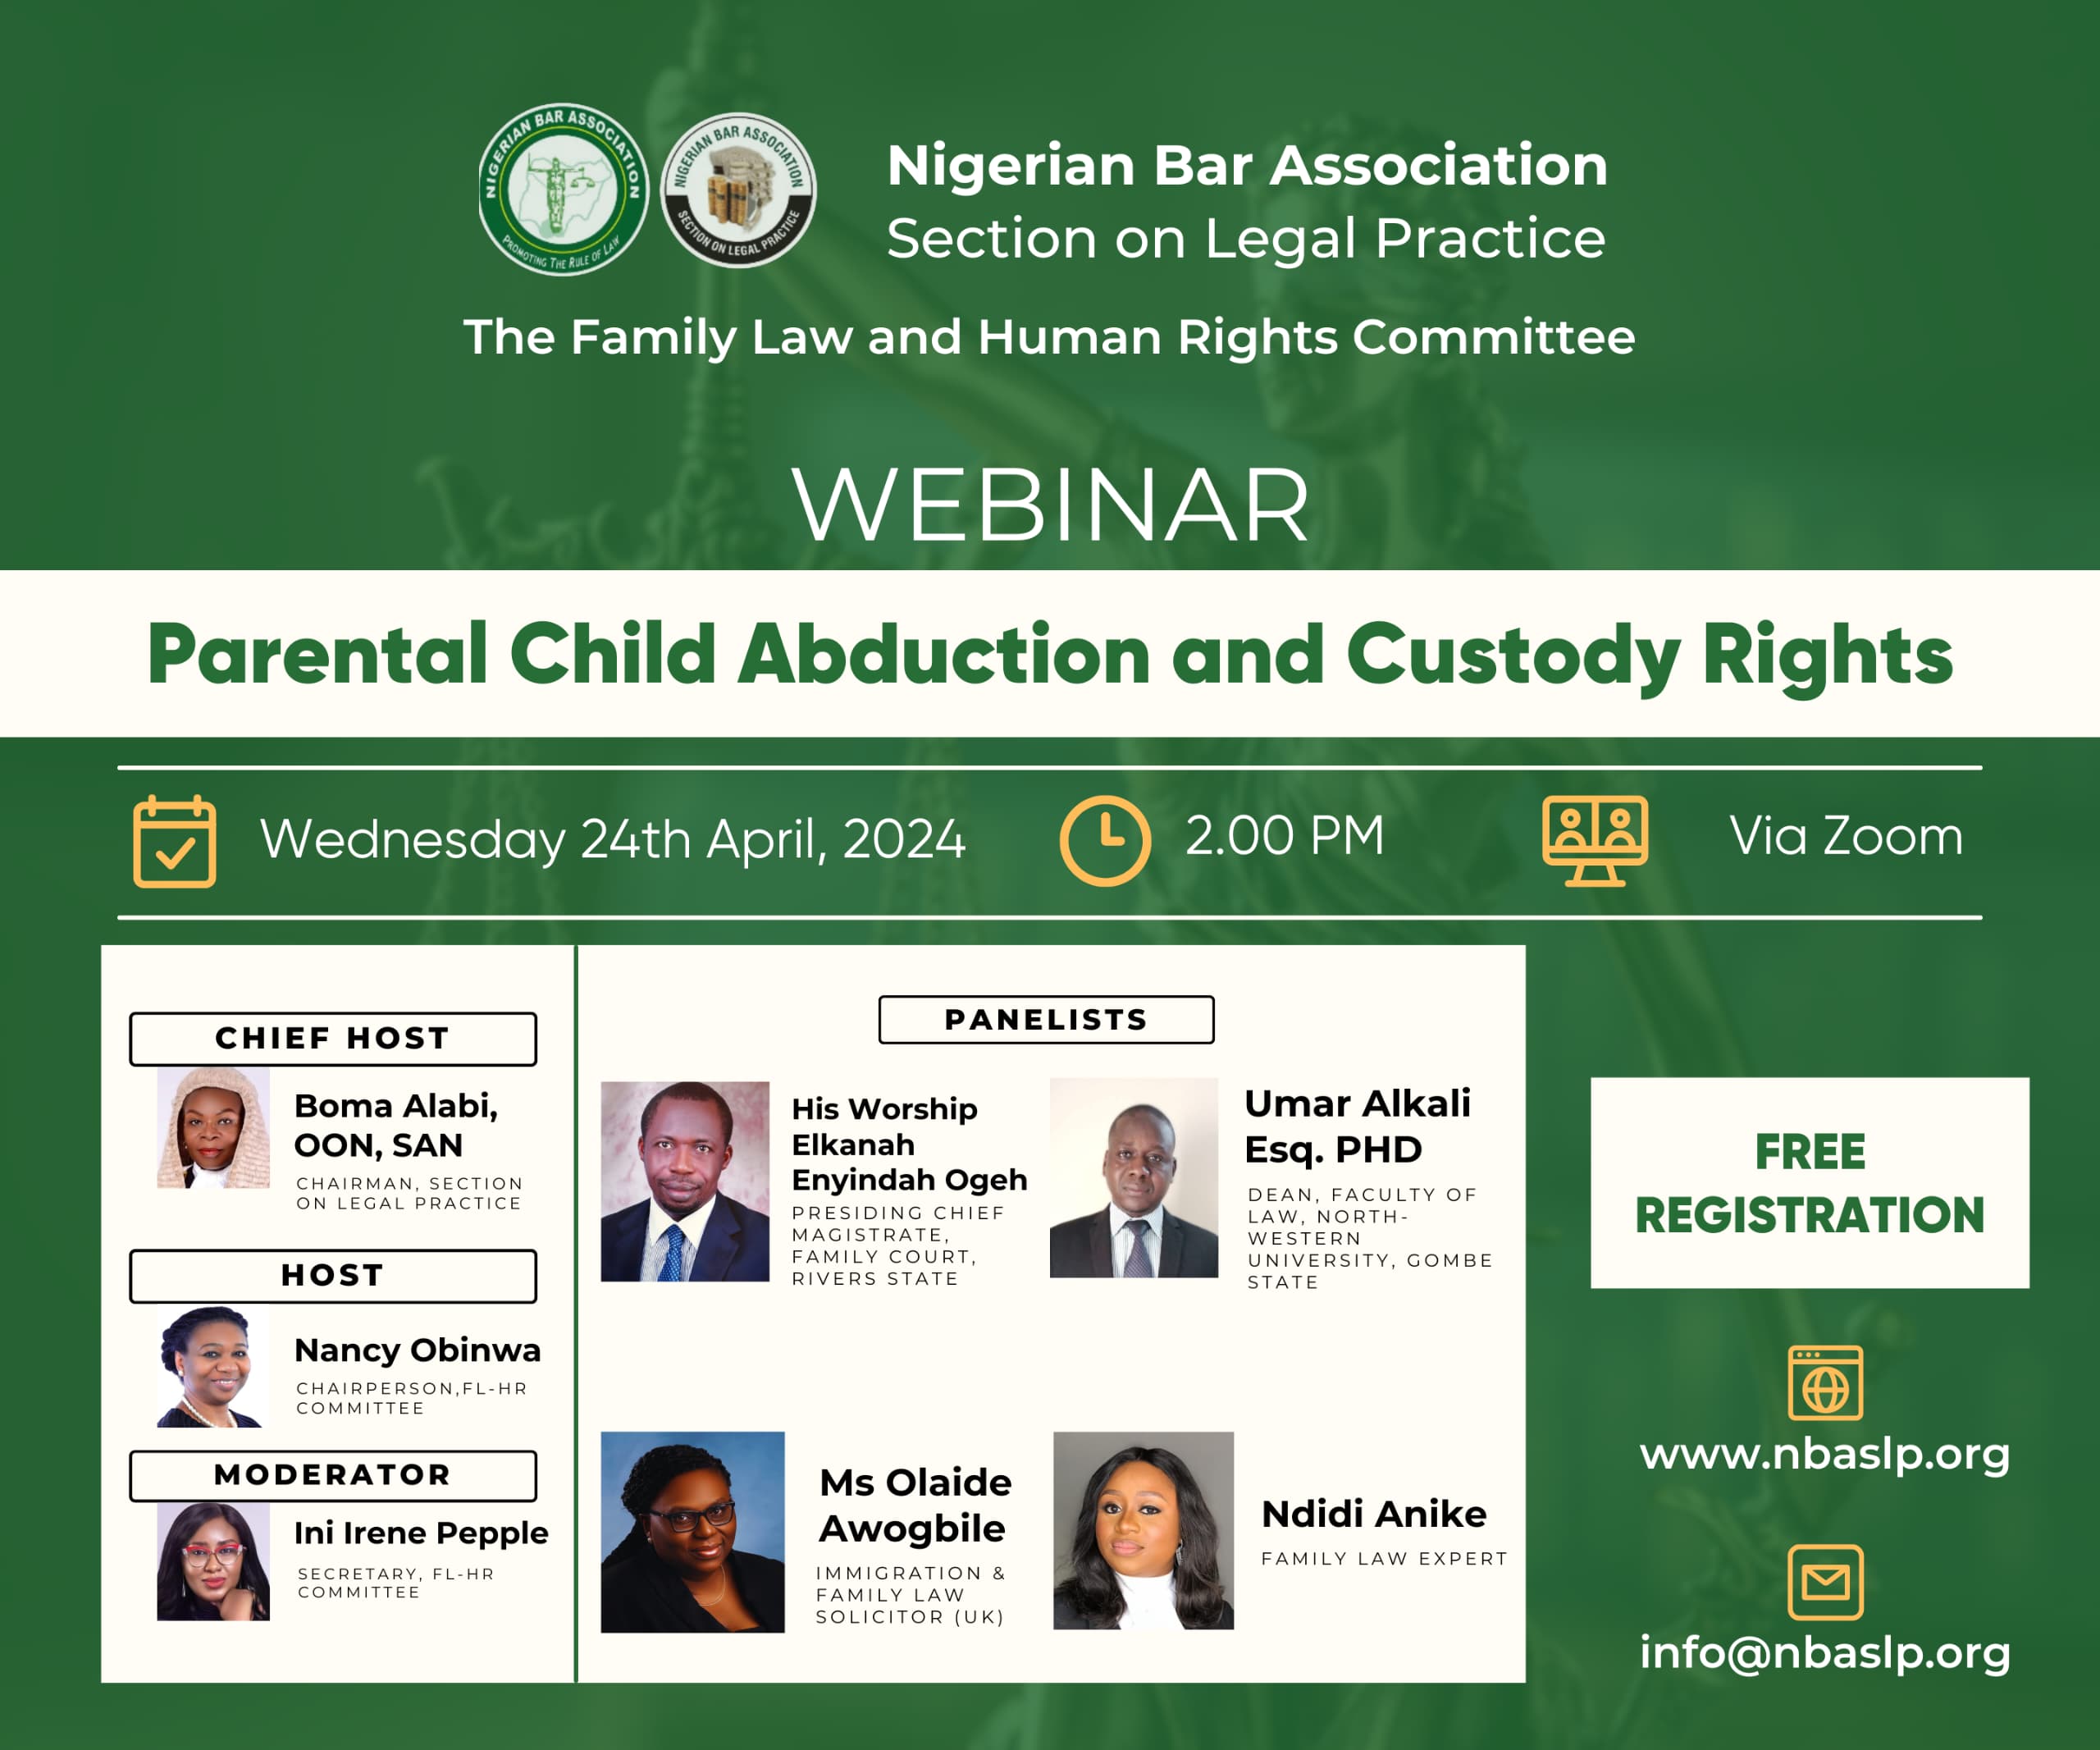 The Family Law & Human Rights Committee Webinar - Parental Child Abduction & Custody Rights!